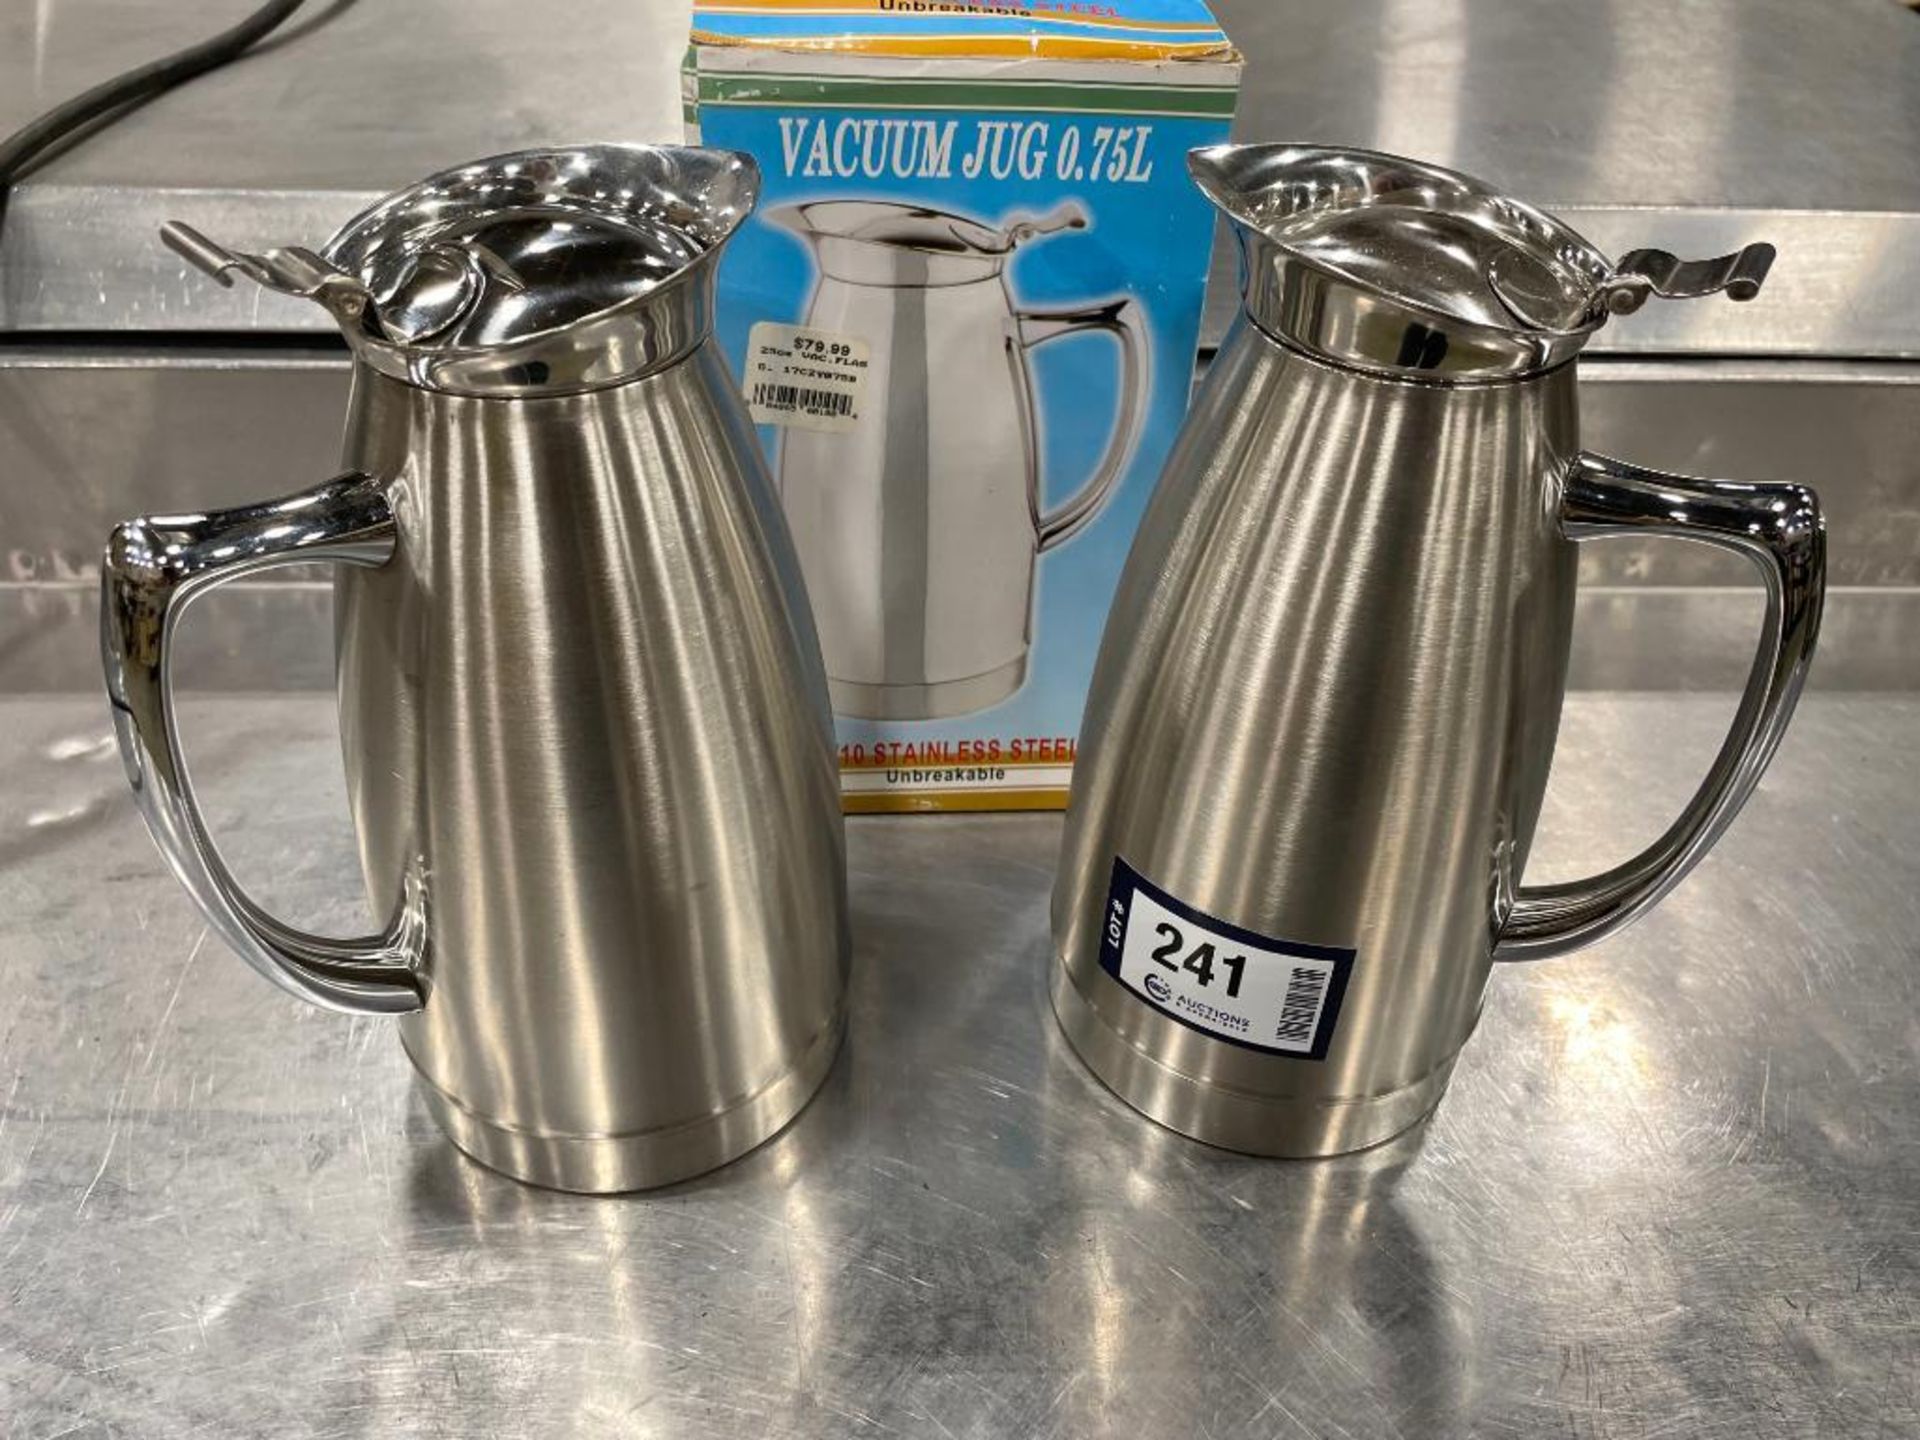 0.75L INSULATED SERVERS - LOT OF 2